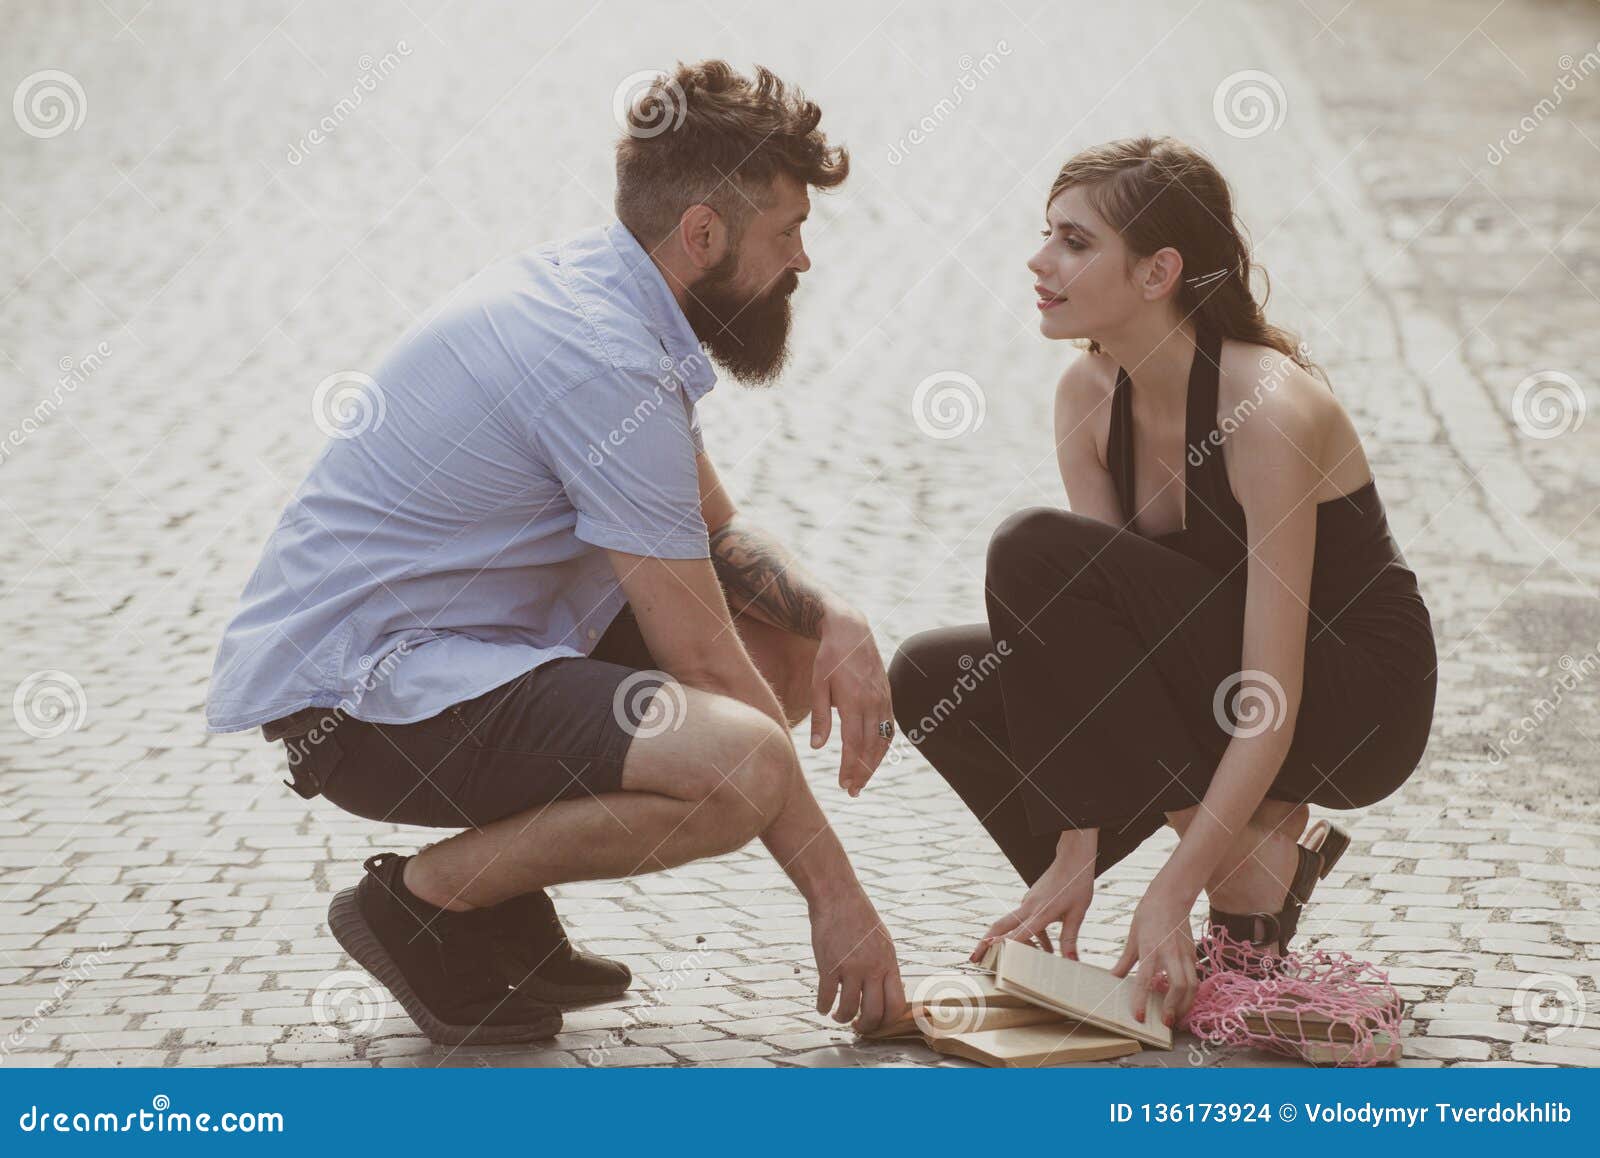 love at first sight. man and woman falling in love. bearded man and cute woman met on street. hipster helping and